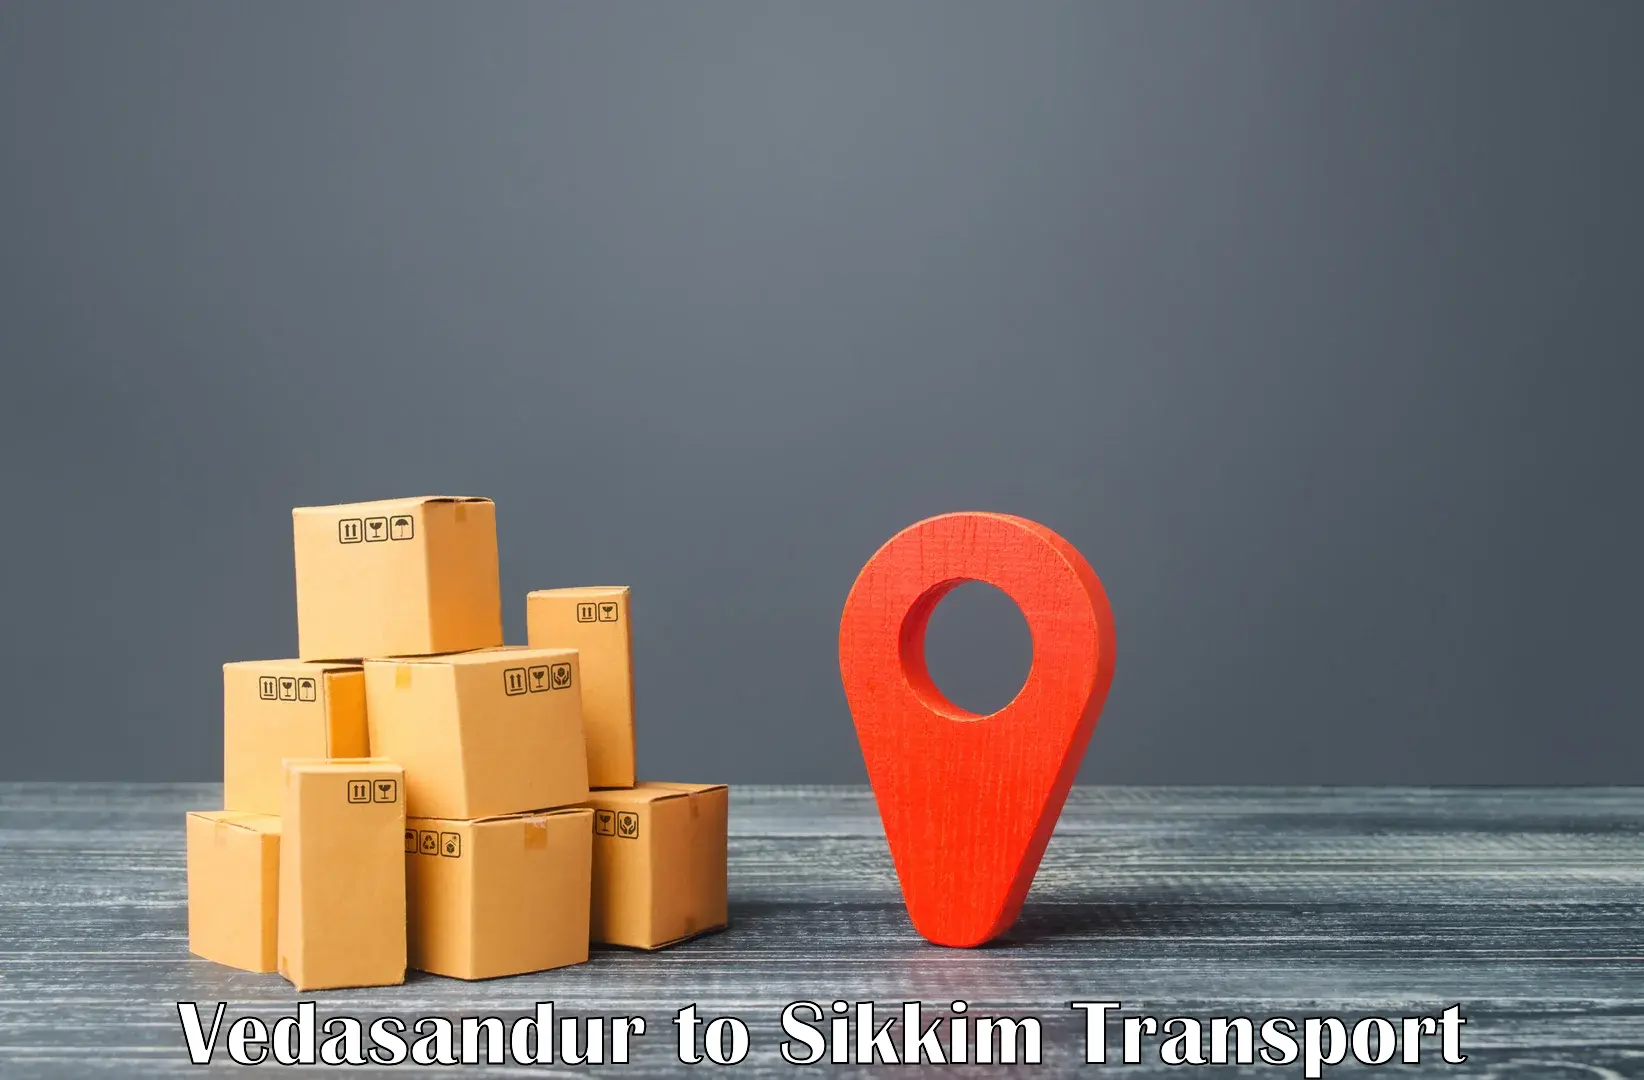 Cycle transportation service in Vedasandur to Sikkim